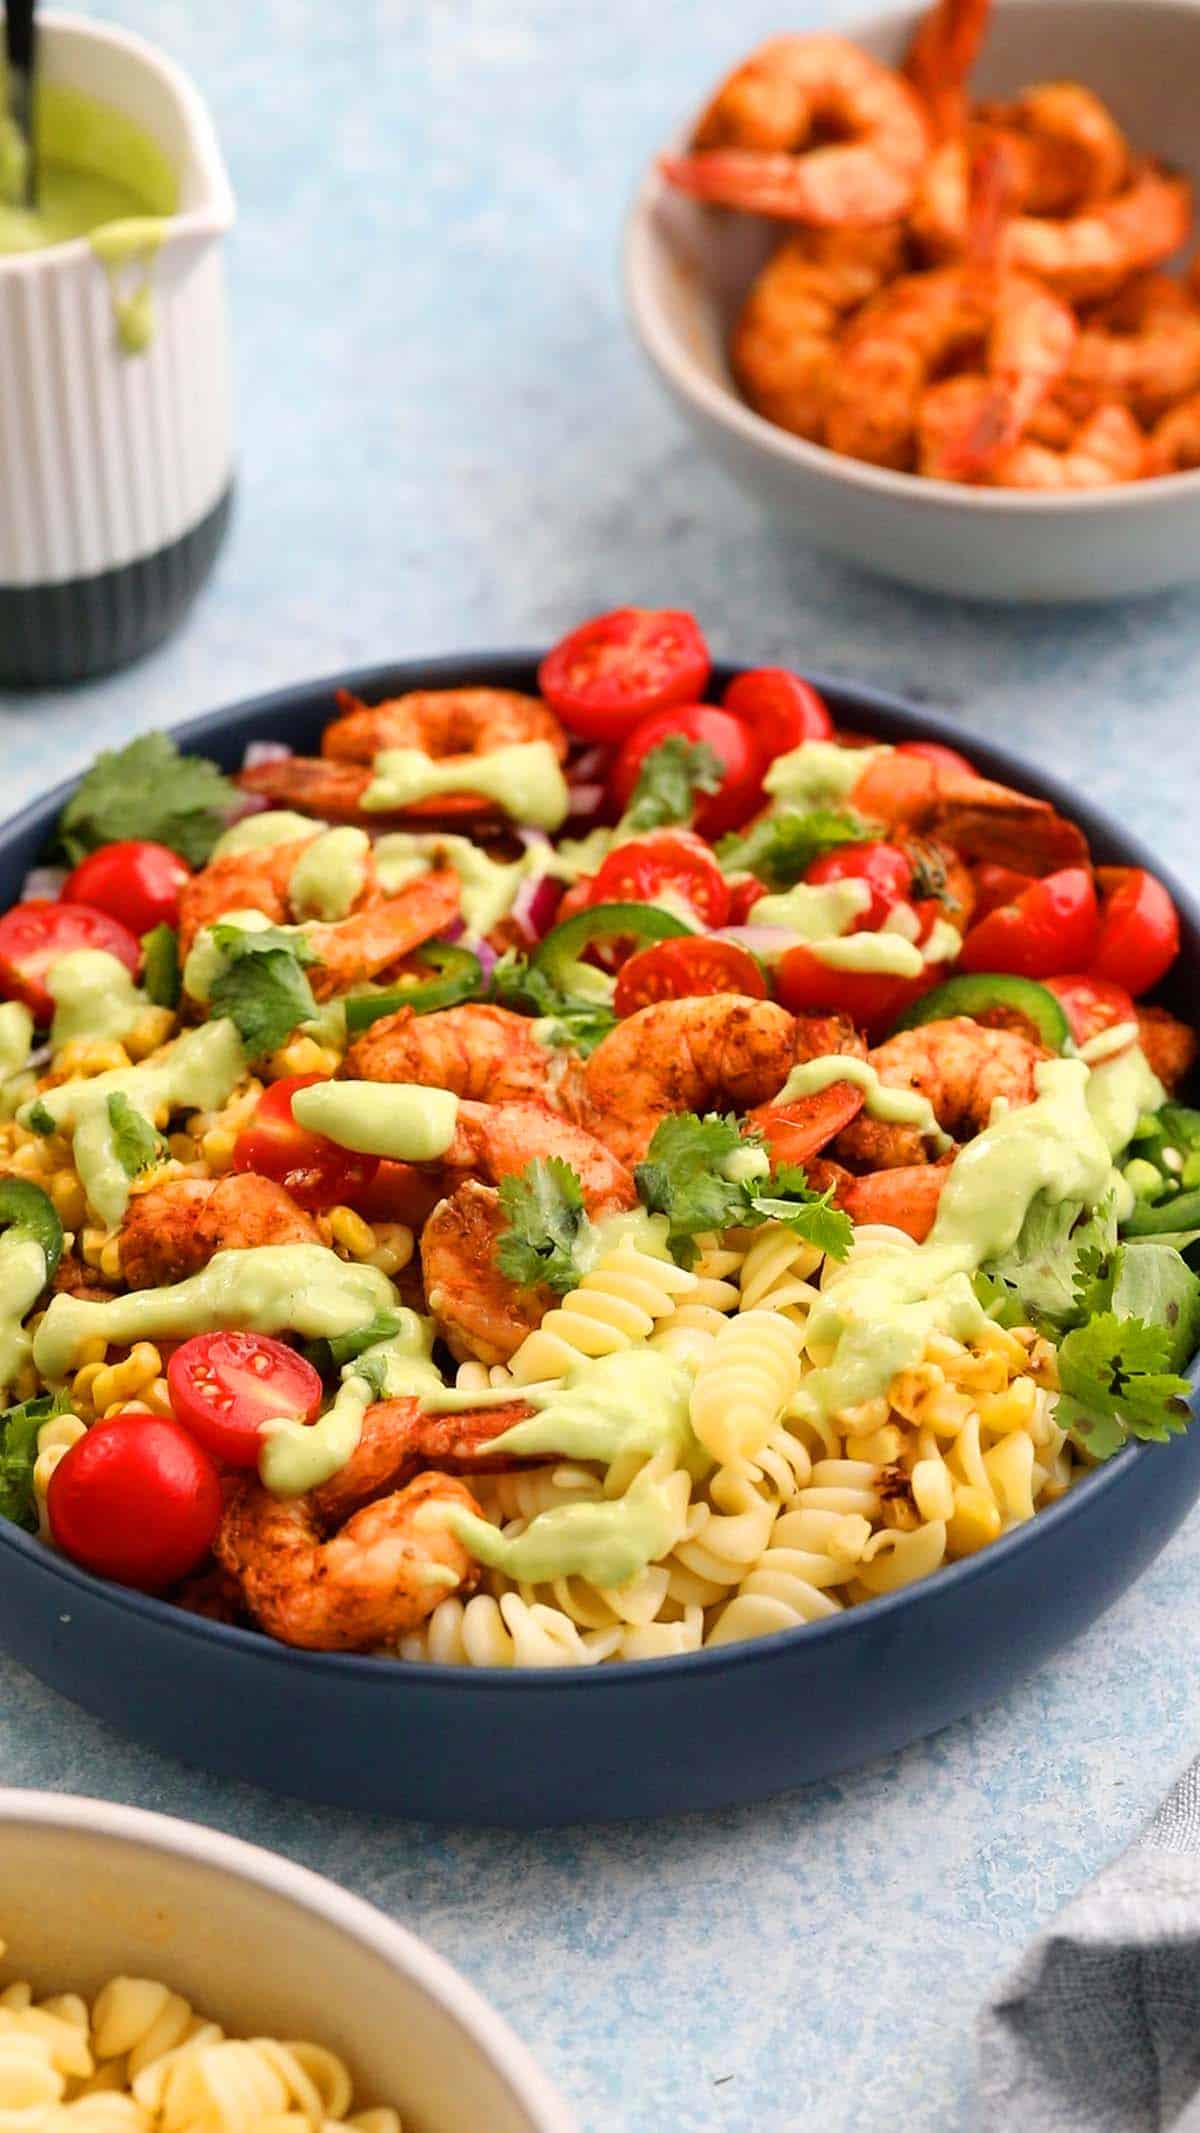 assembled shrimp and pasta salad, topped with green dressing in a blue bowl.